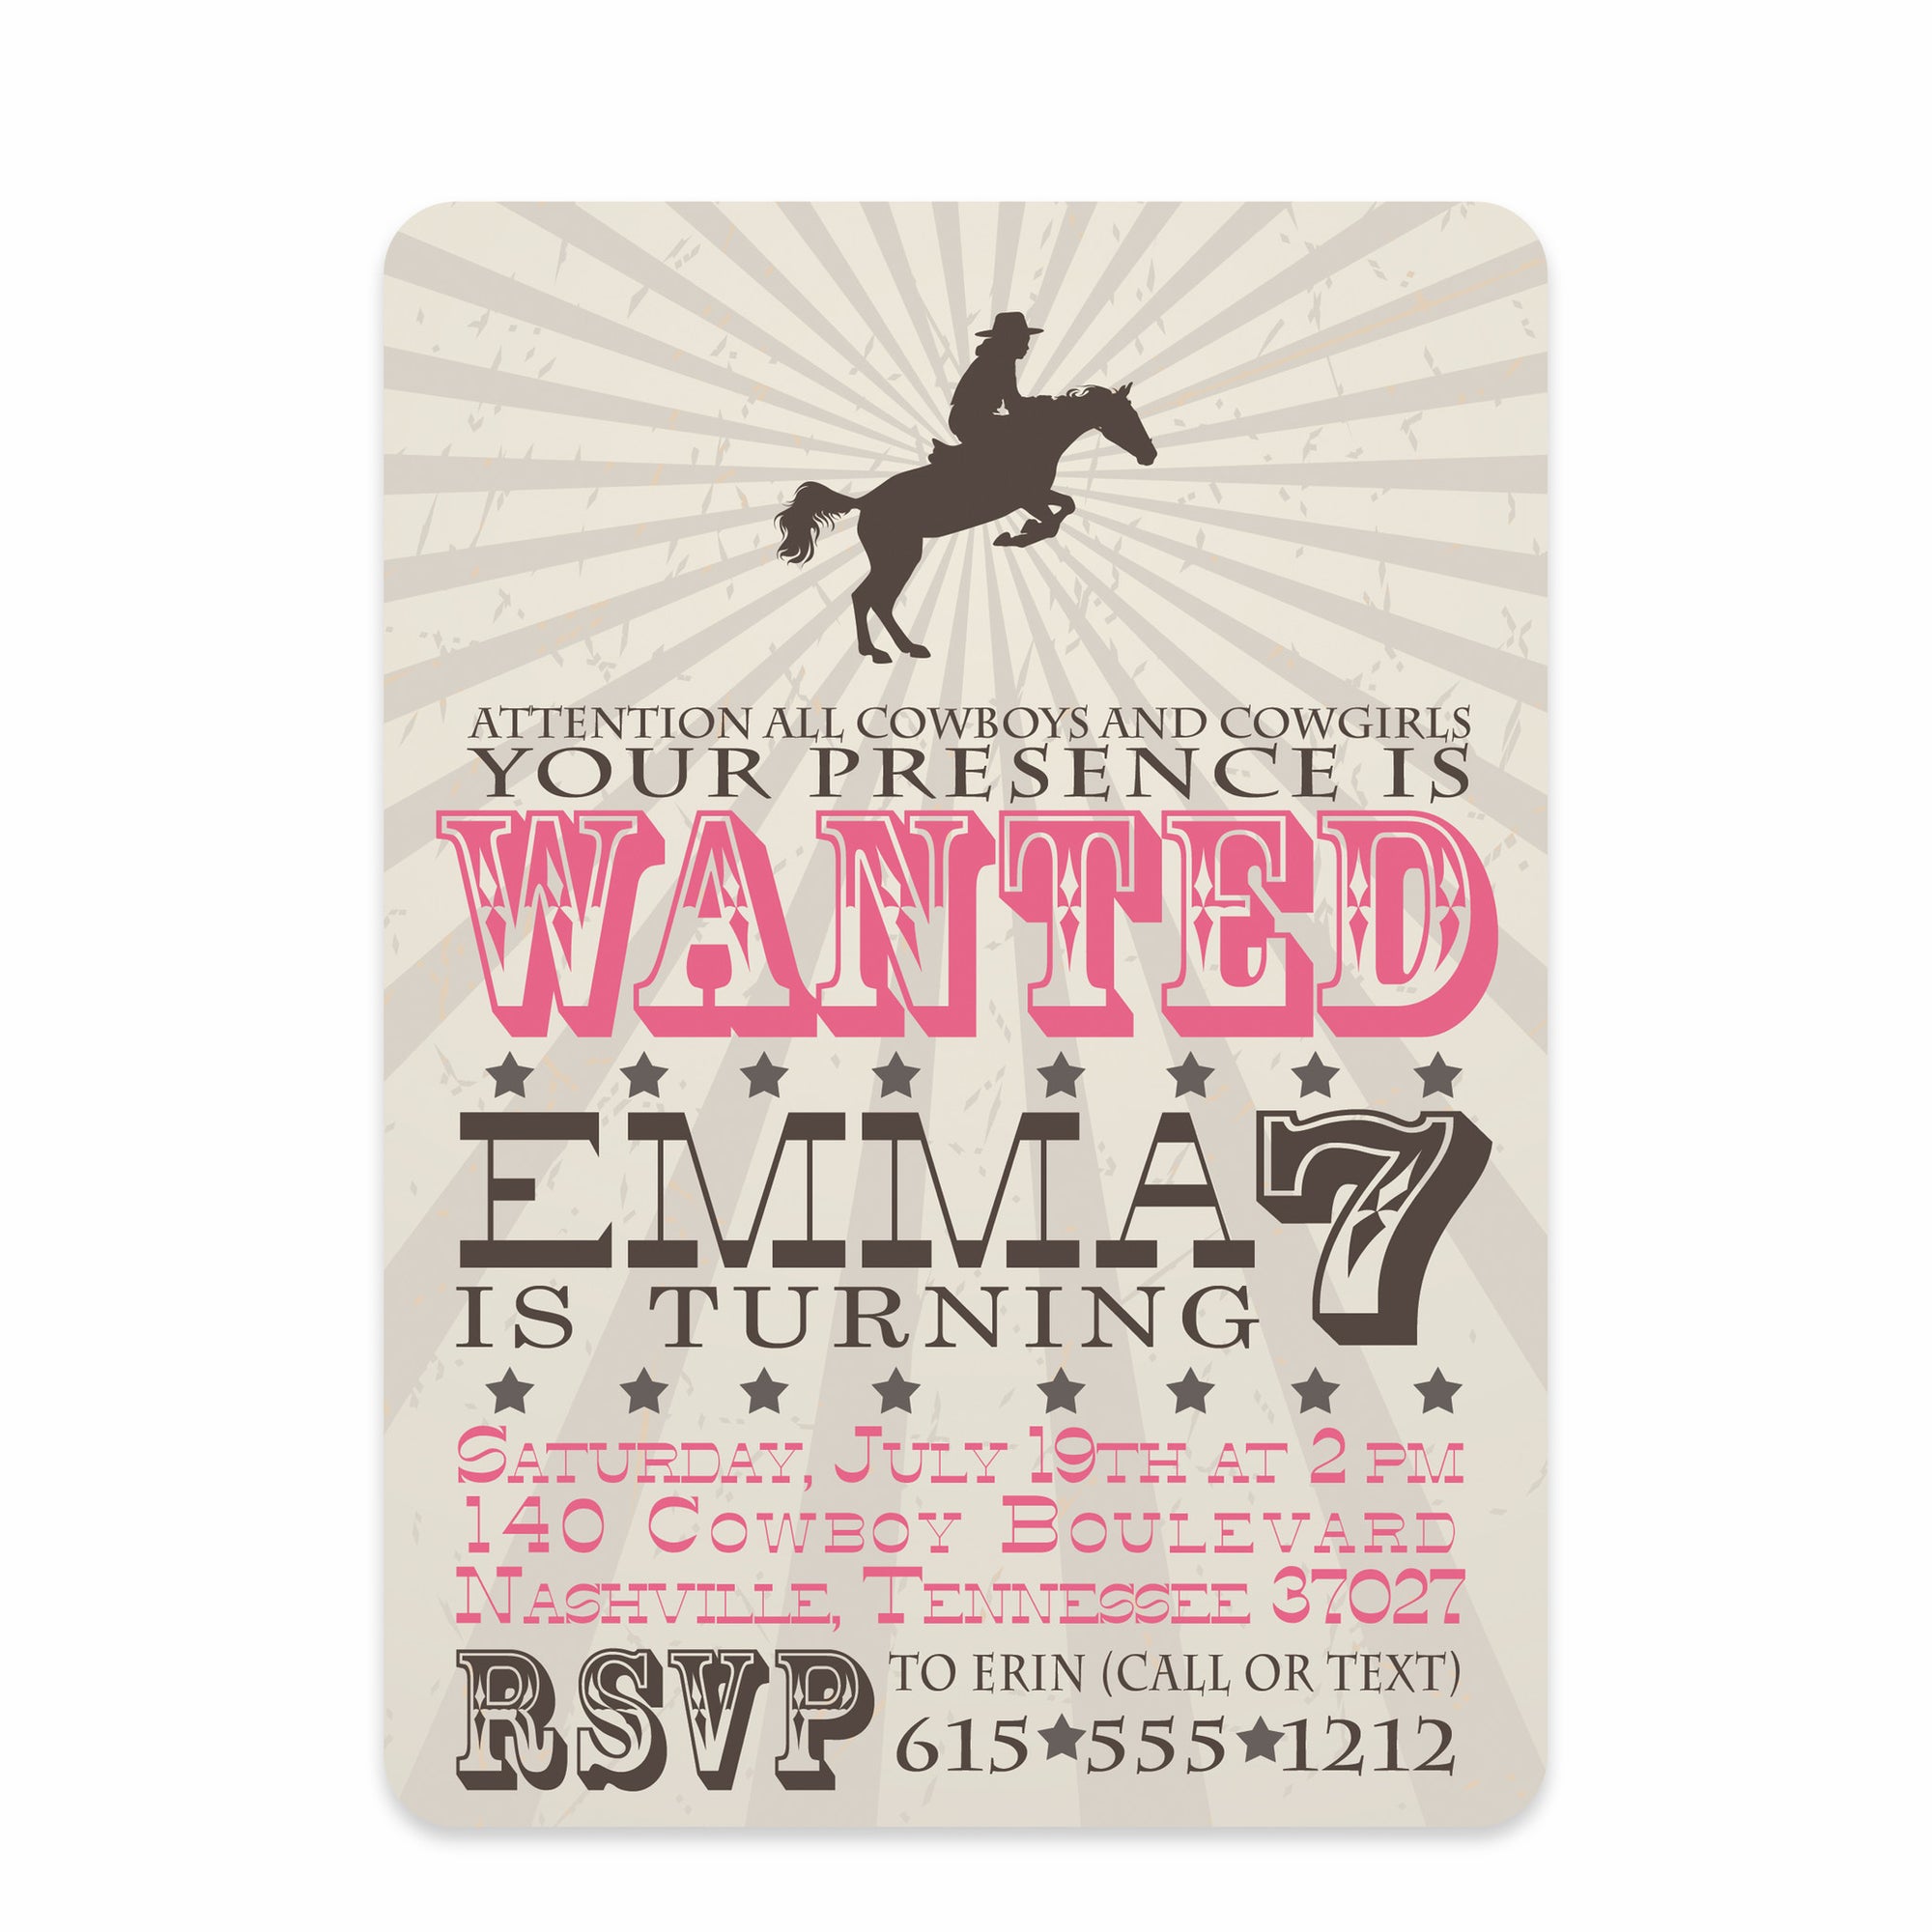 Cowgirl Western Birthday Invitation, Printed on heavy cardstock with a pink bandana design on the back, from Pipsy.com, front